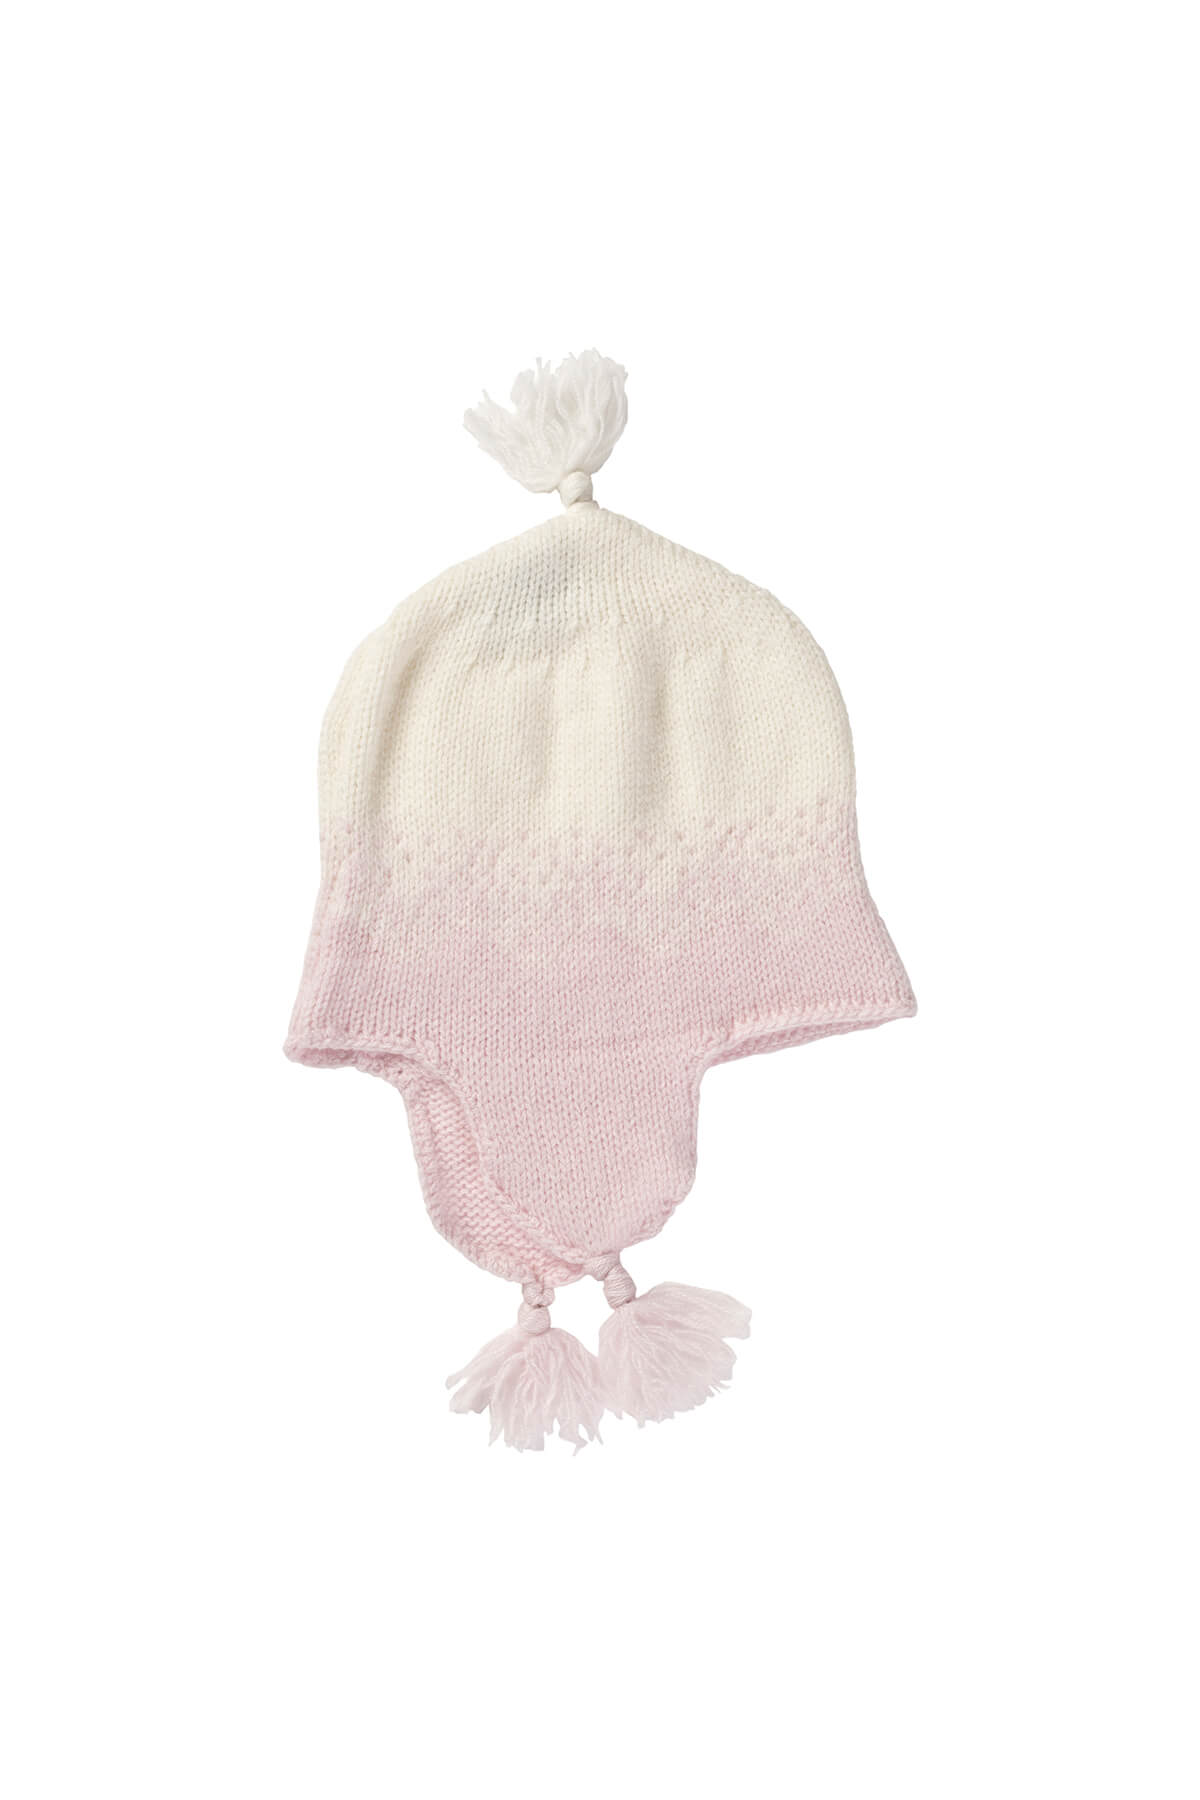 Johnstons of Elgin Hand Knitted Ombre Cashmere Baby Hat in Blush on a white background 76194SE0208